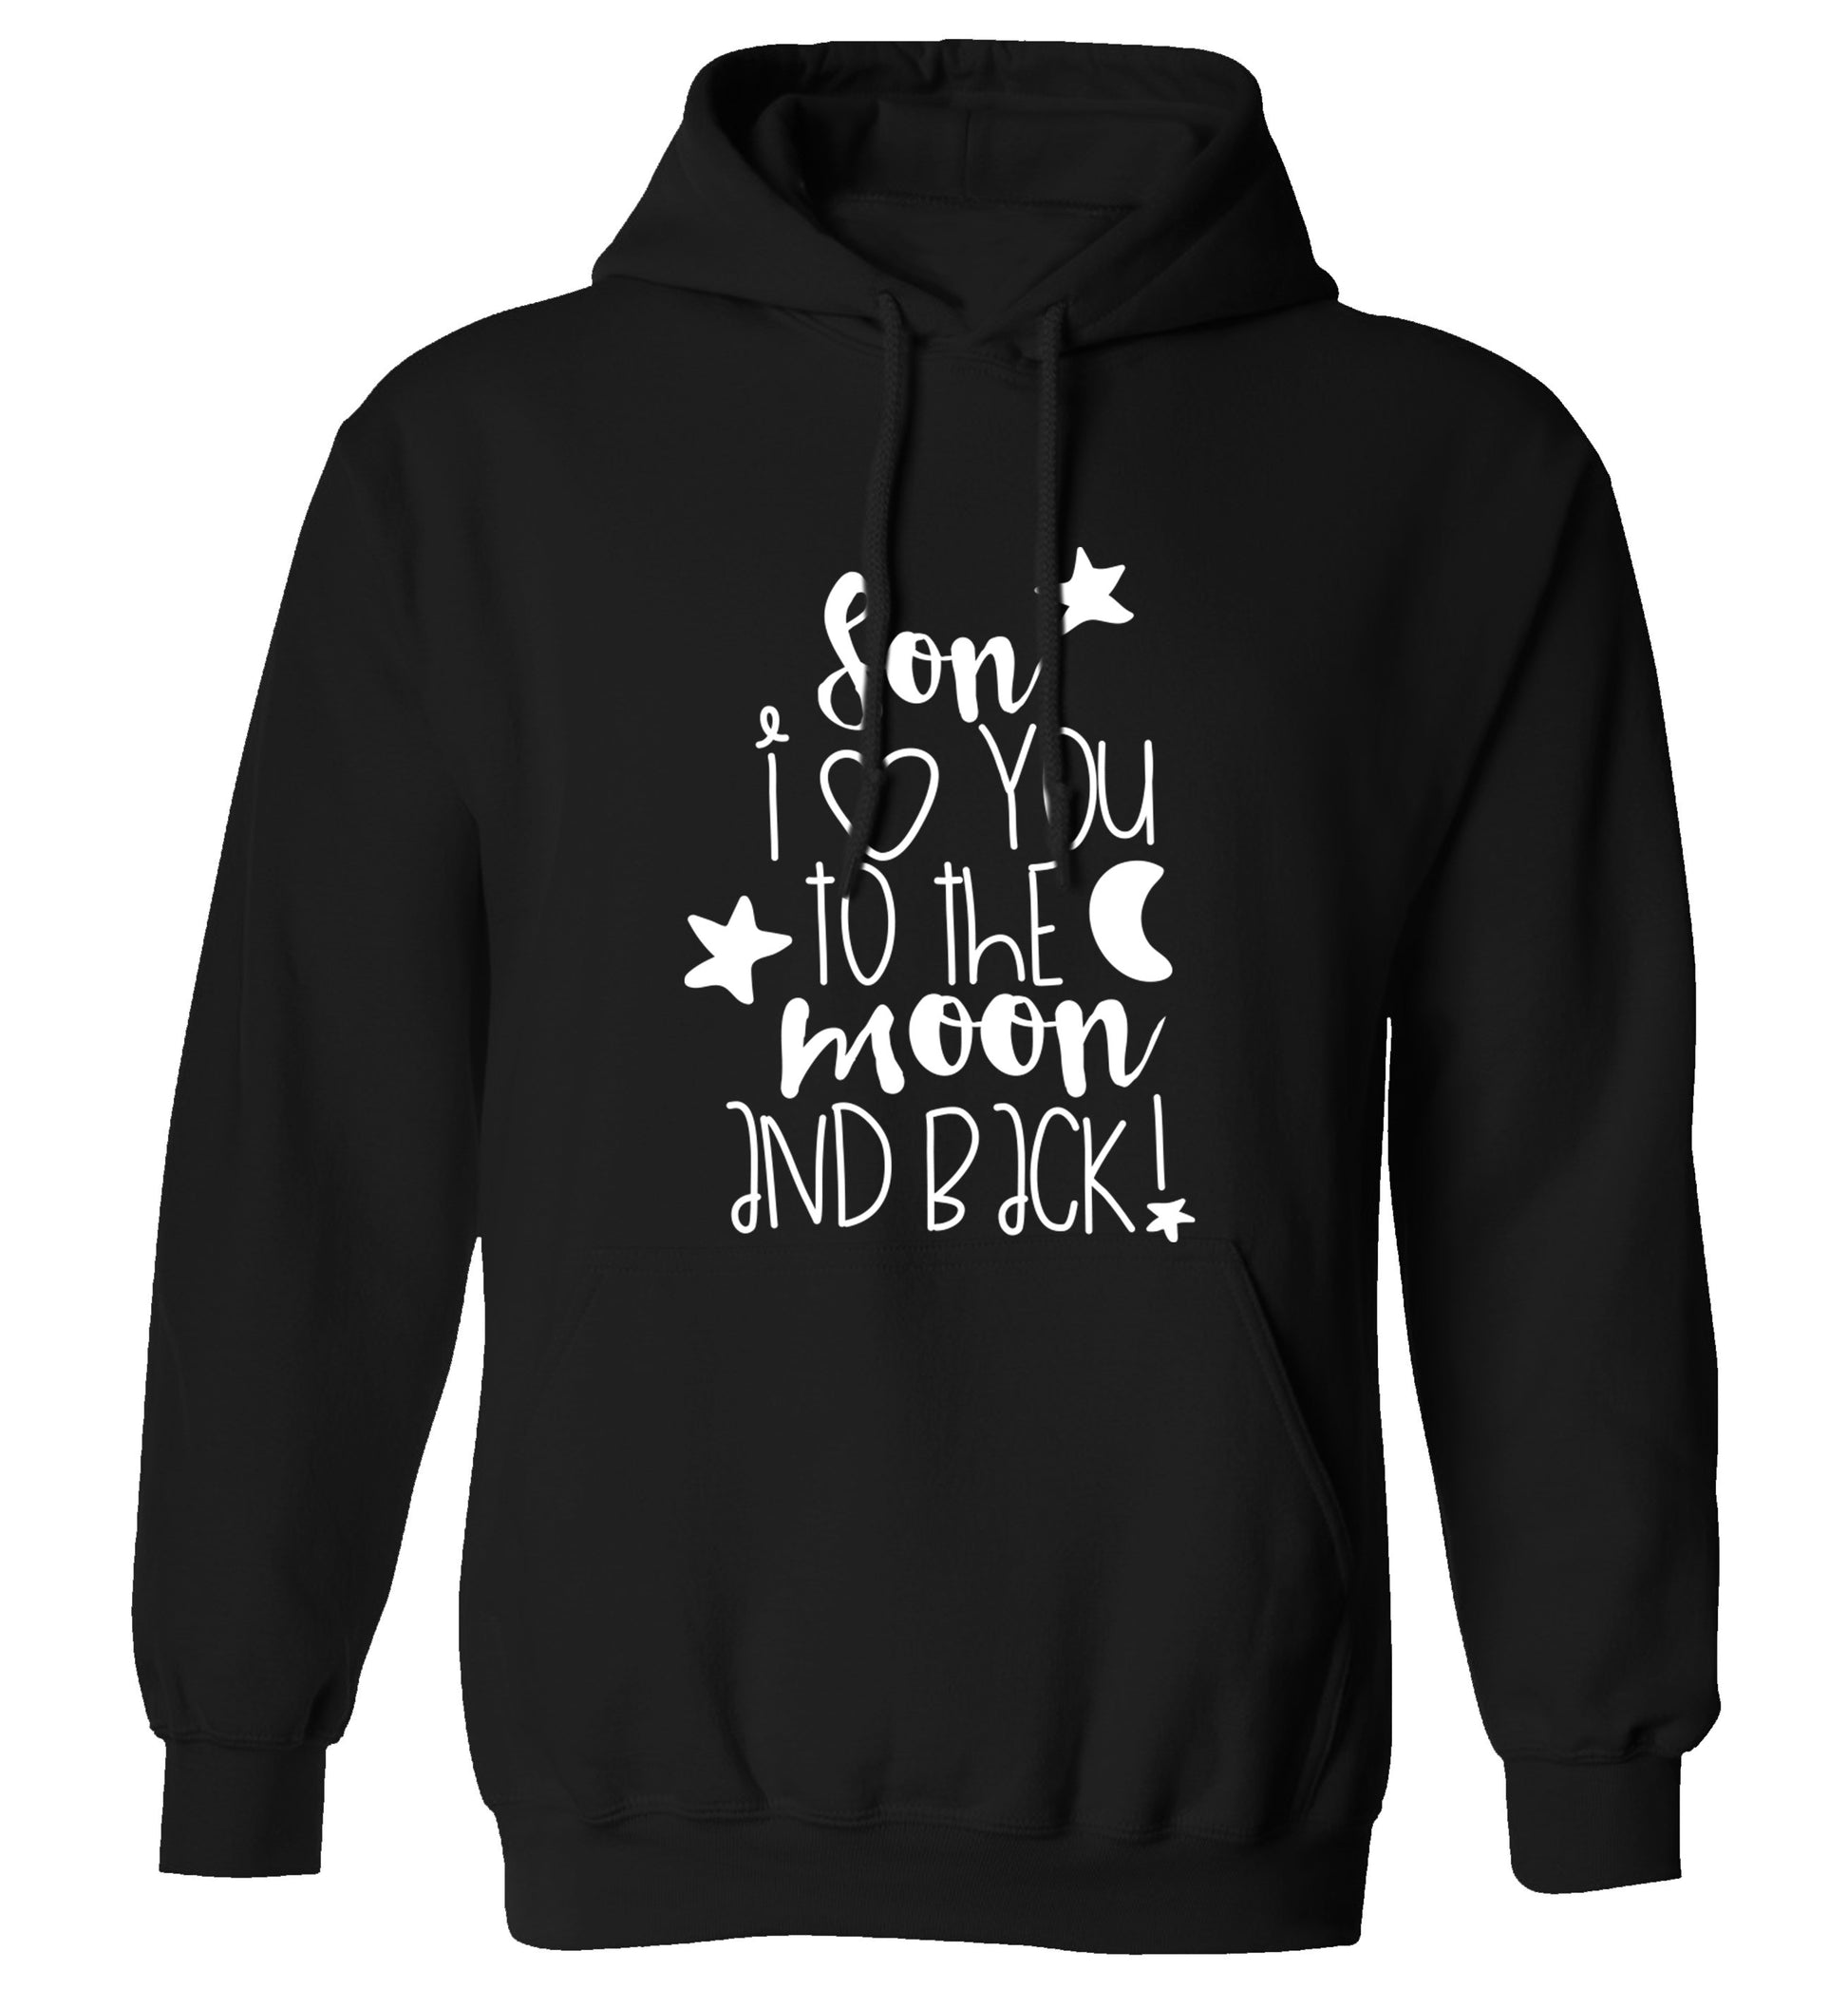 Son I love you to the moon and back adults unisex black hoodie 2XL